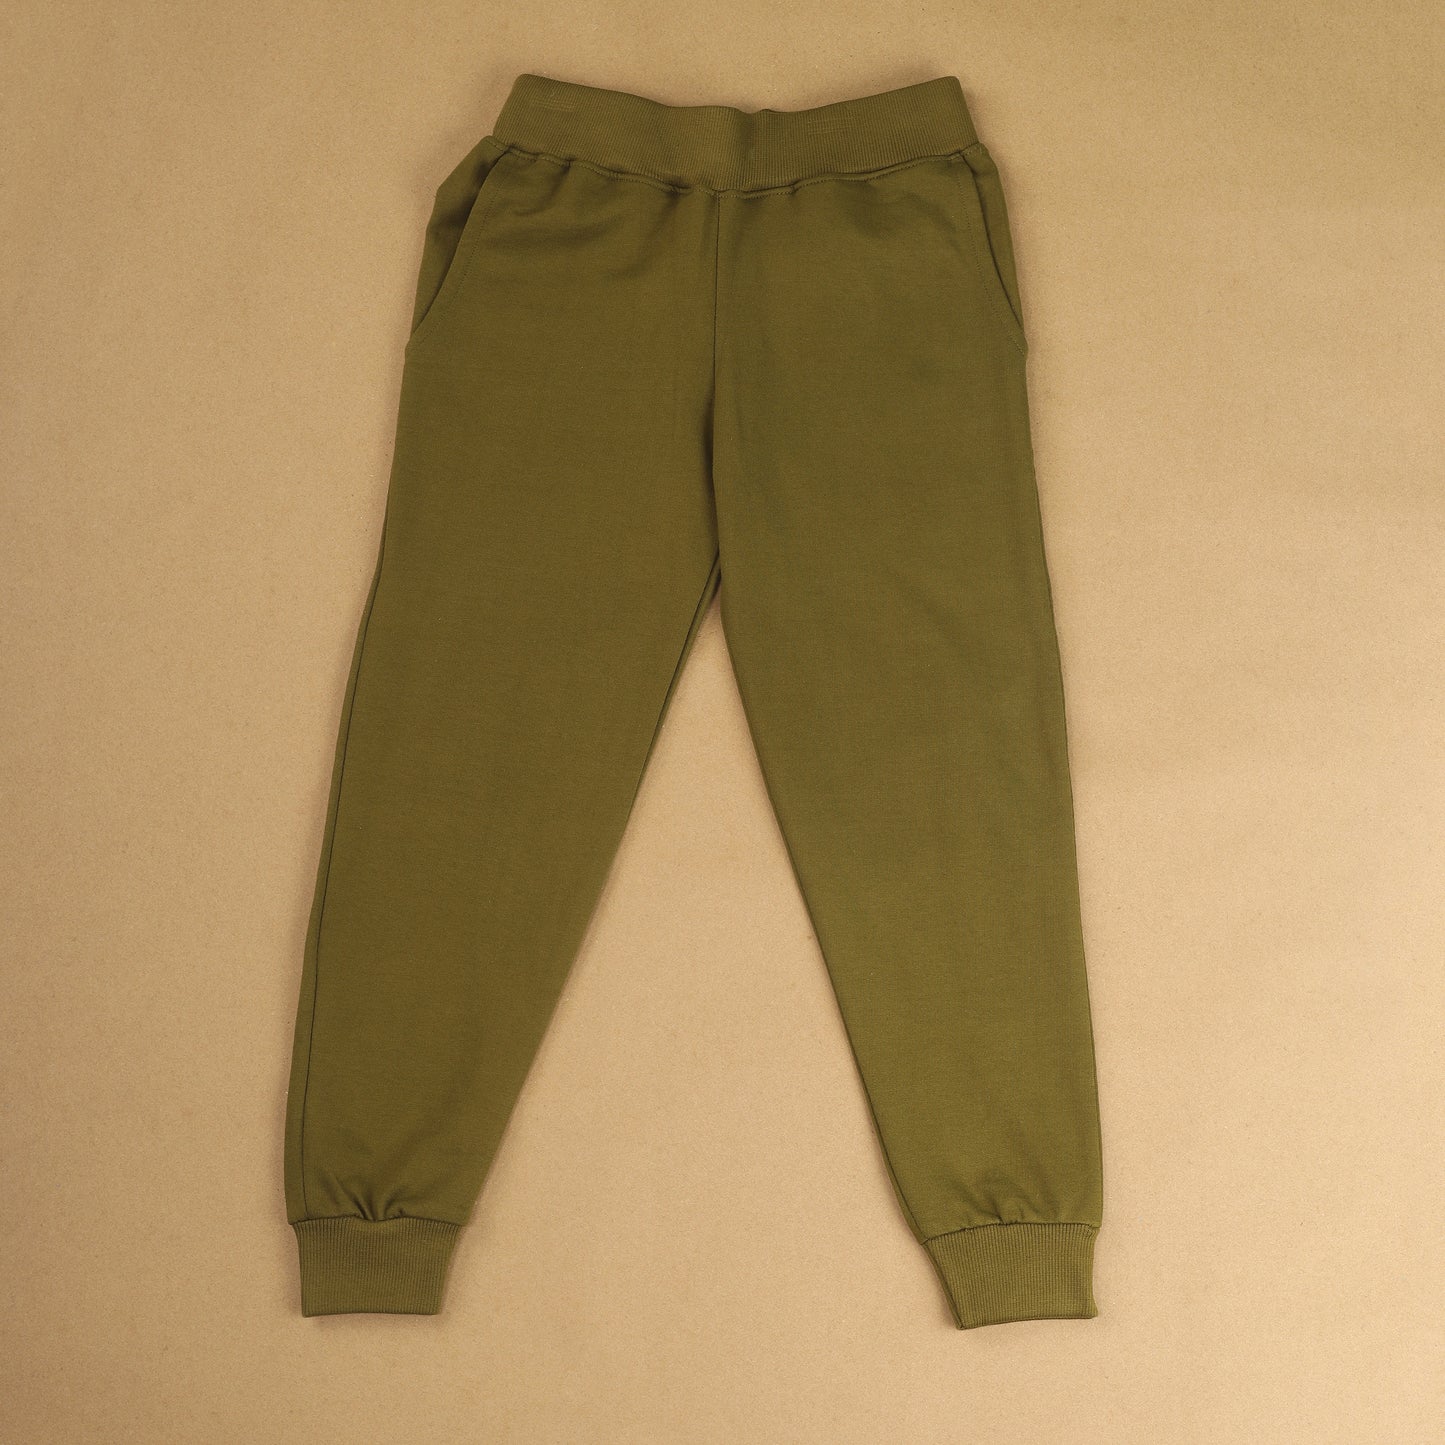 Olive Green #OOTD Pure Cotton Typographic Joggers Set with Pockets for Kids